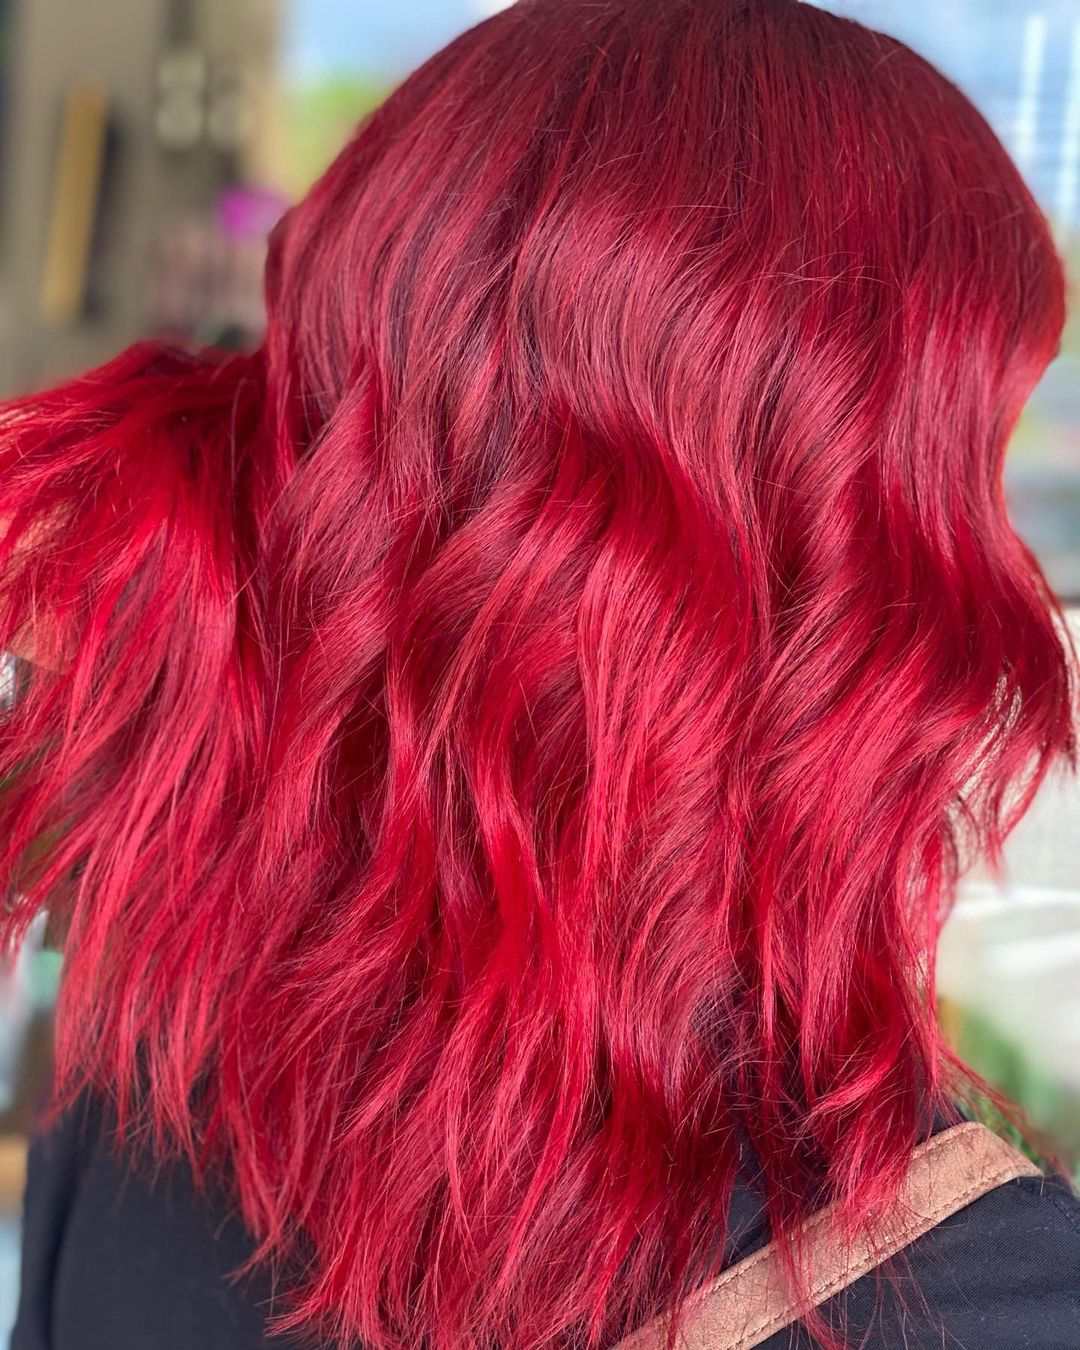 8 Best Bright Red Hair Dyes in 2023 [Expert Reviews]